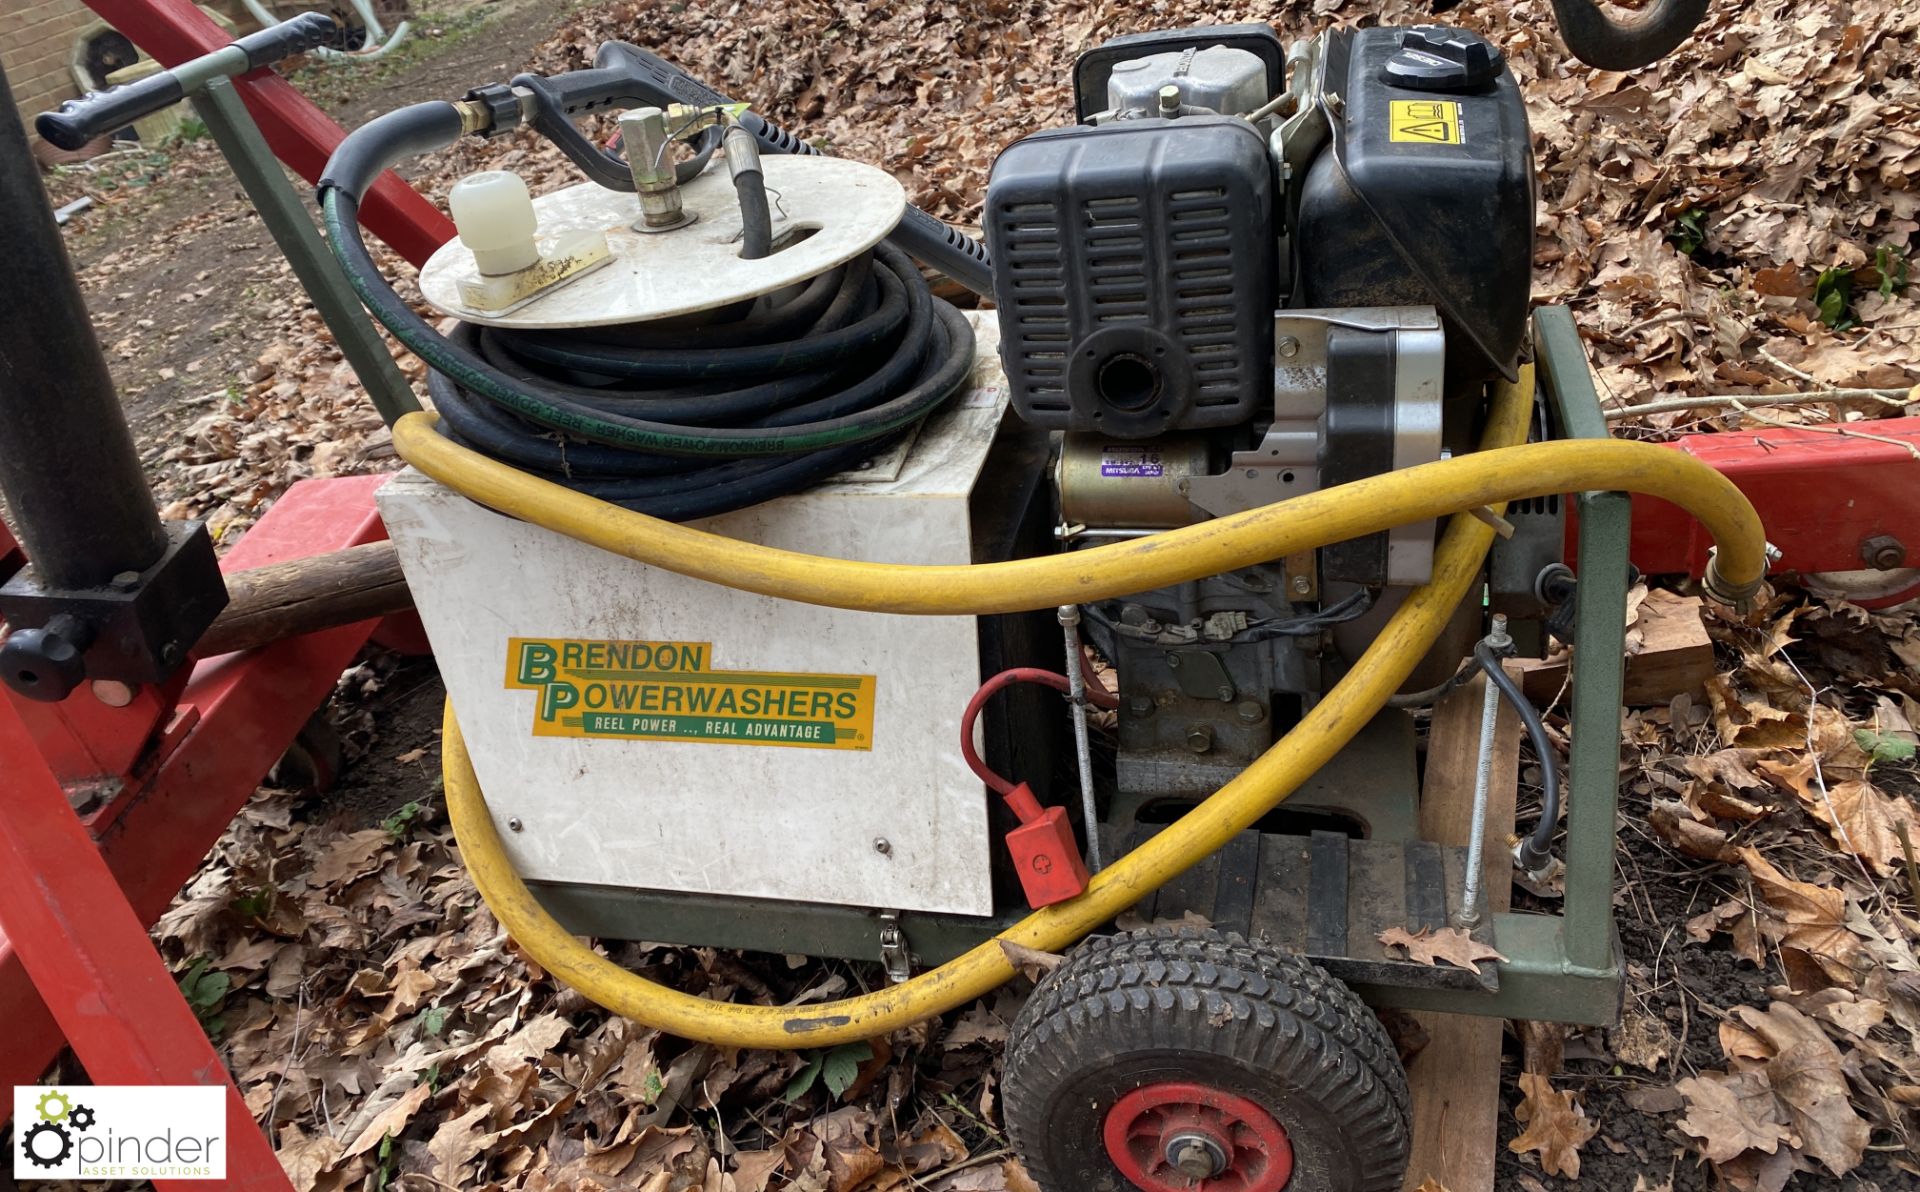 Brendon diesel driven Pressure Washer, with Honda 9.0 diesel engine, retractable hose and lance, max